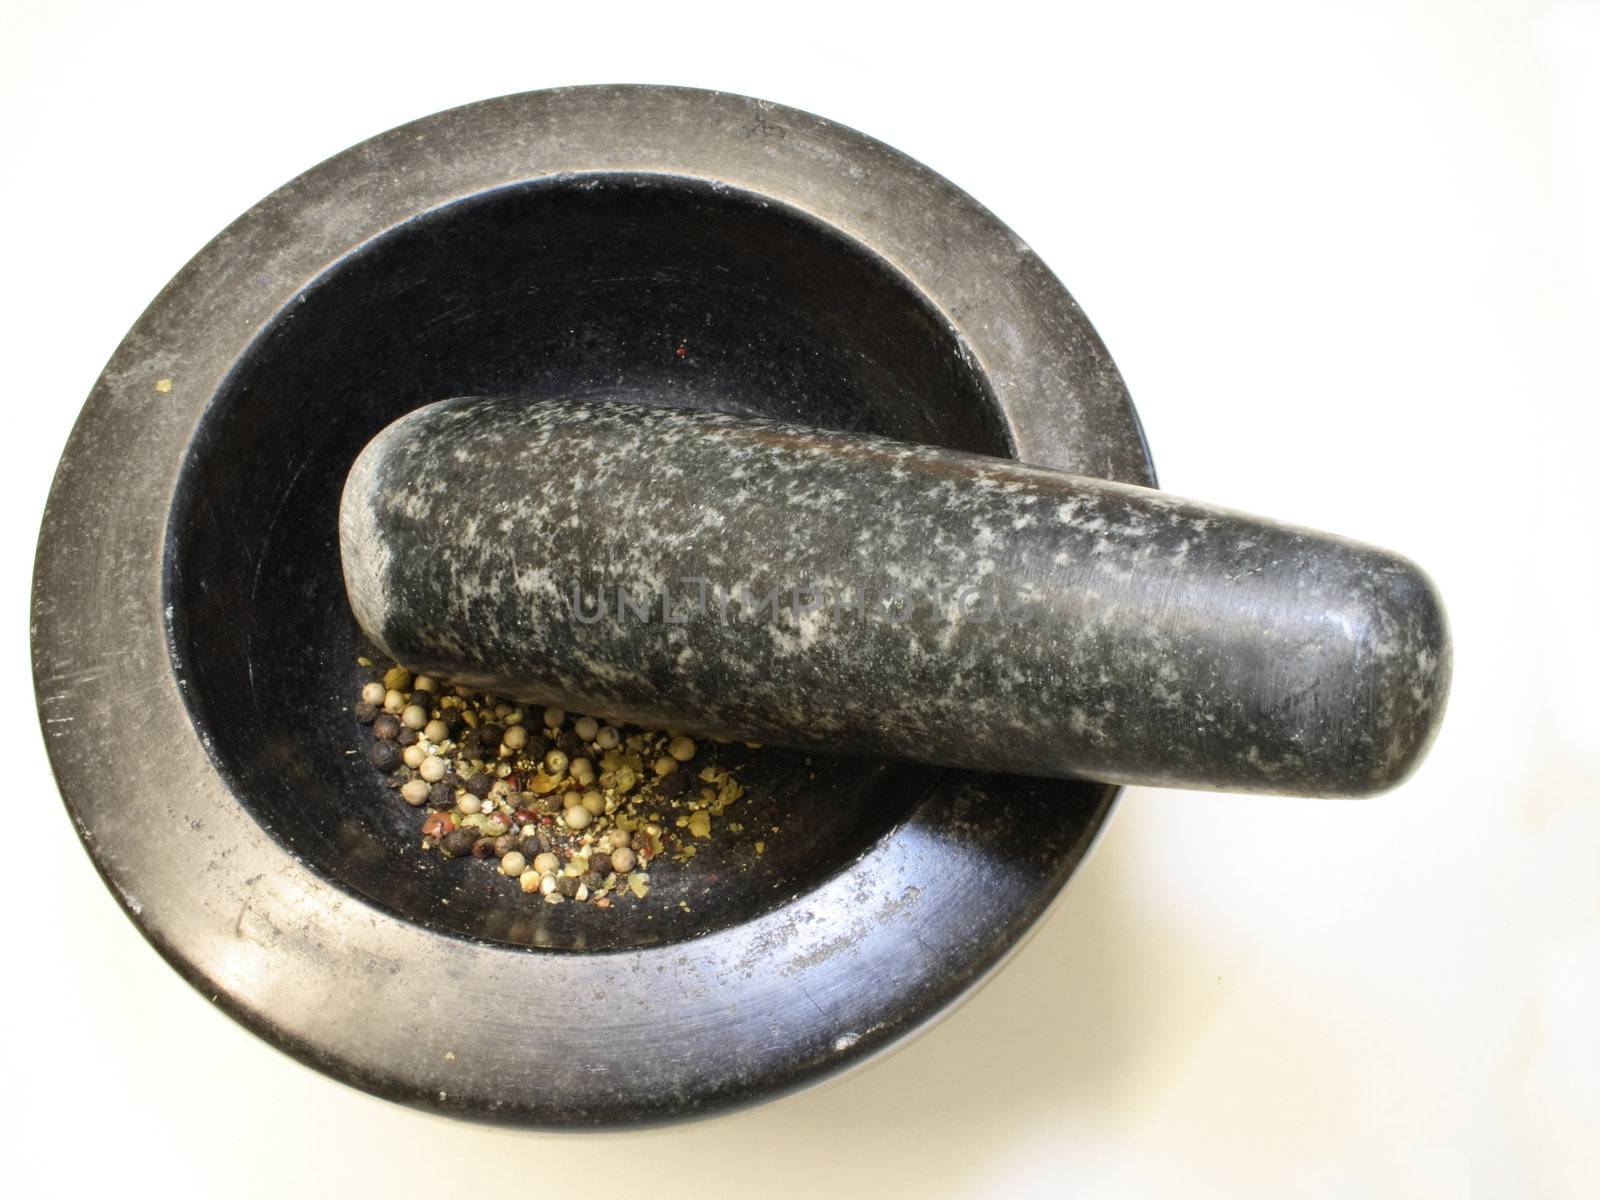 grinding pepper corns in a black granite pestle and mortar bowl isolated over a white background